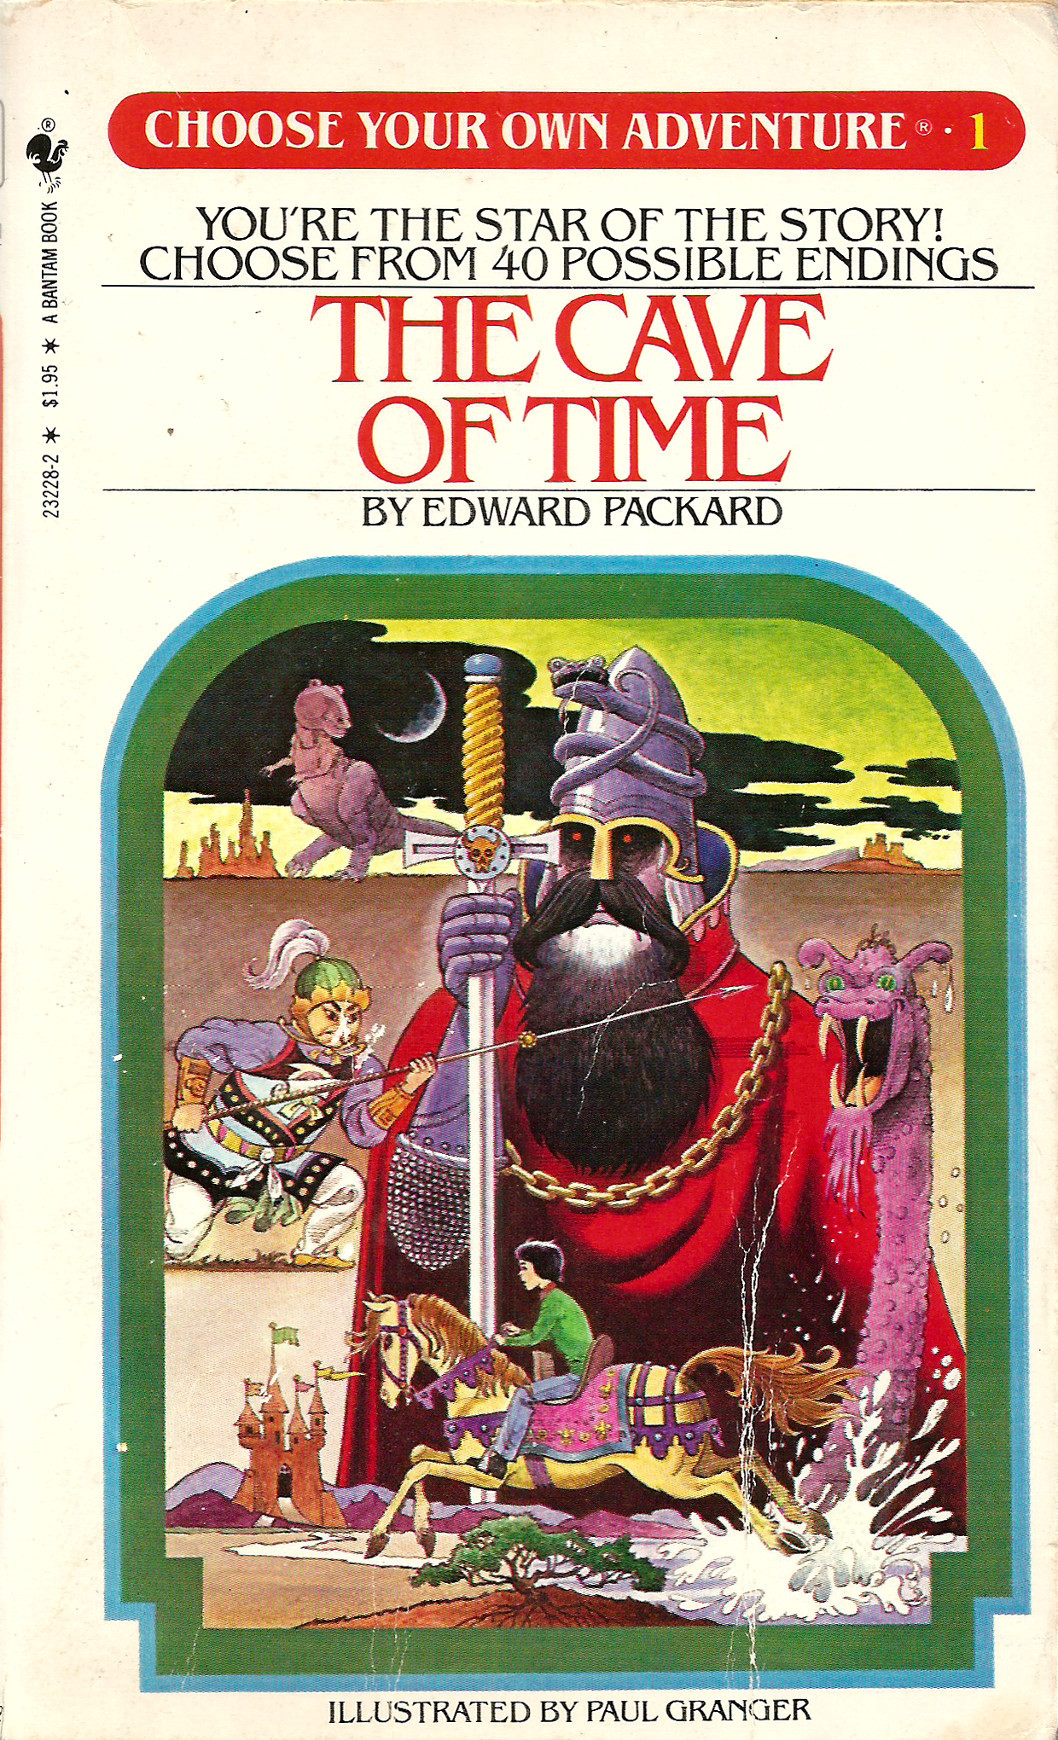 Choose Your Own Adventure No. 1: The Cave of Time, by Edward Packard. Illustrated